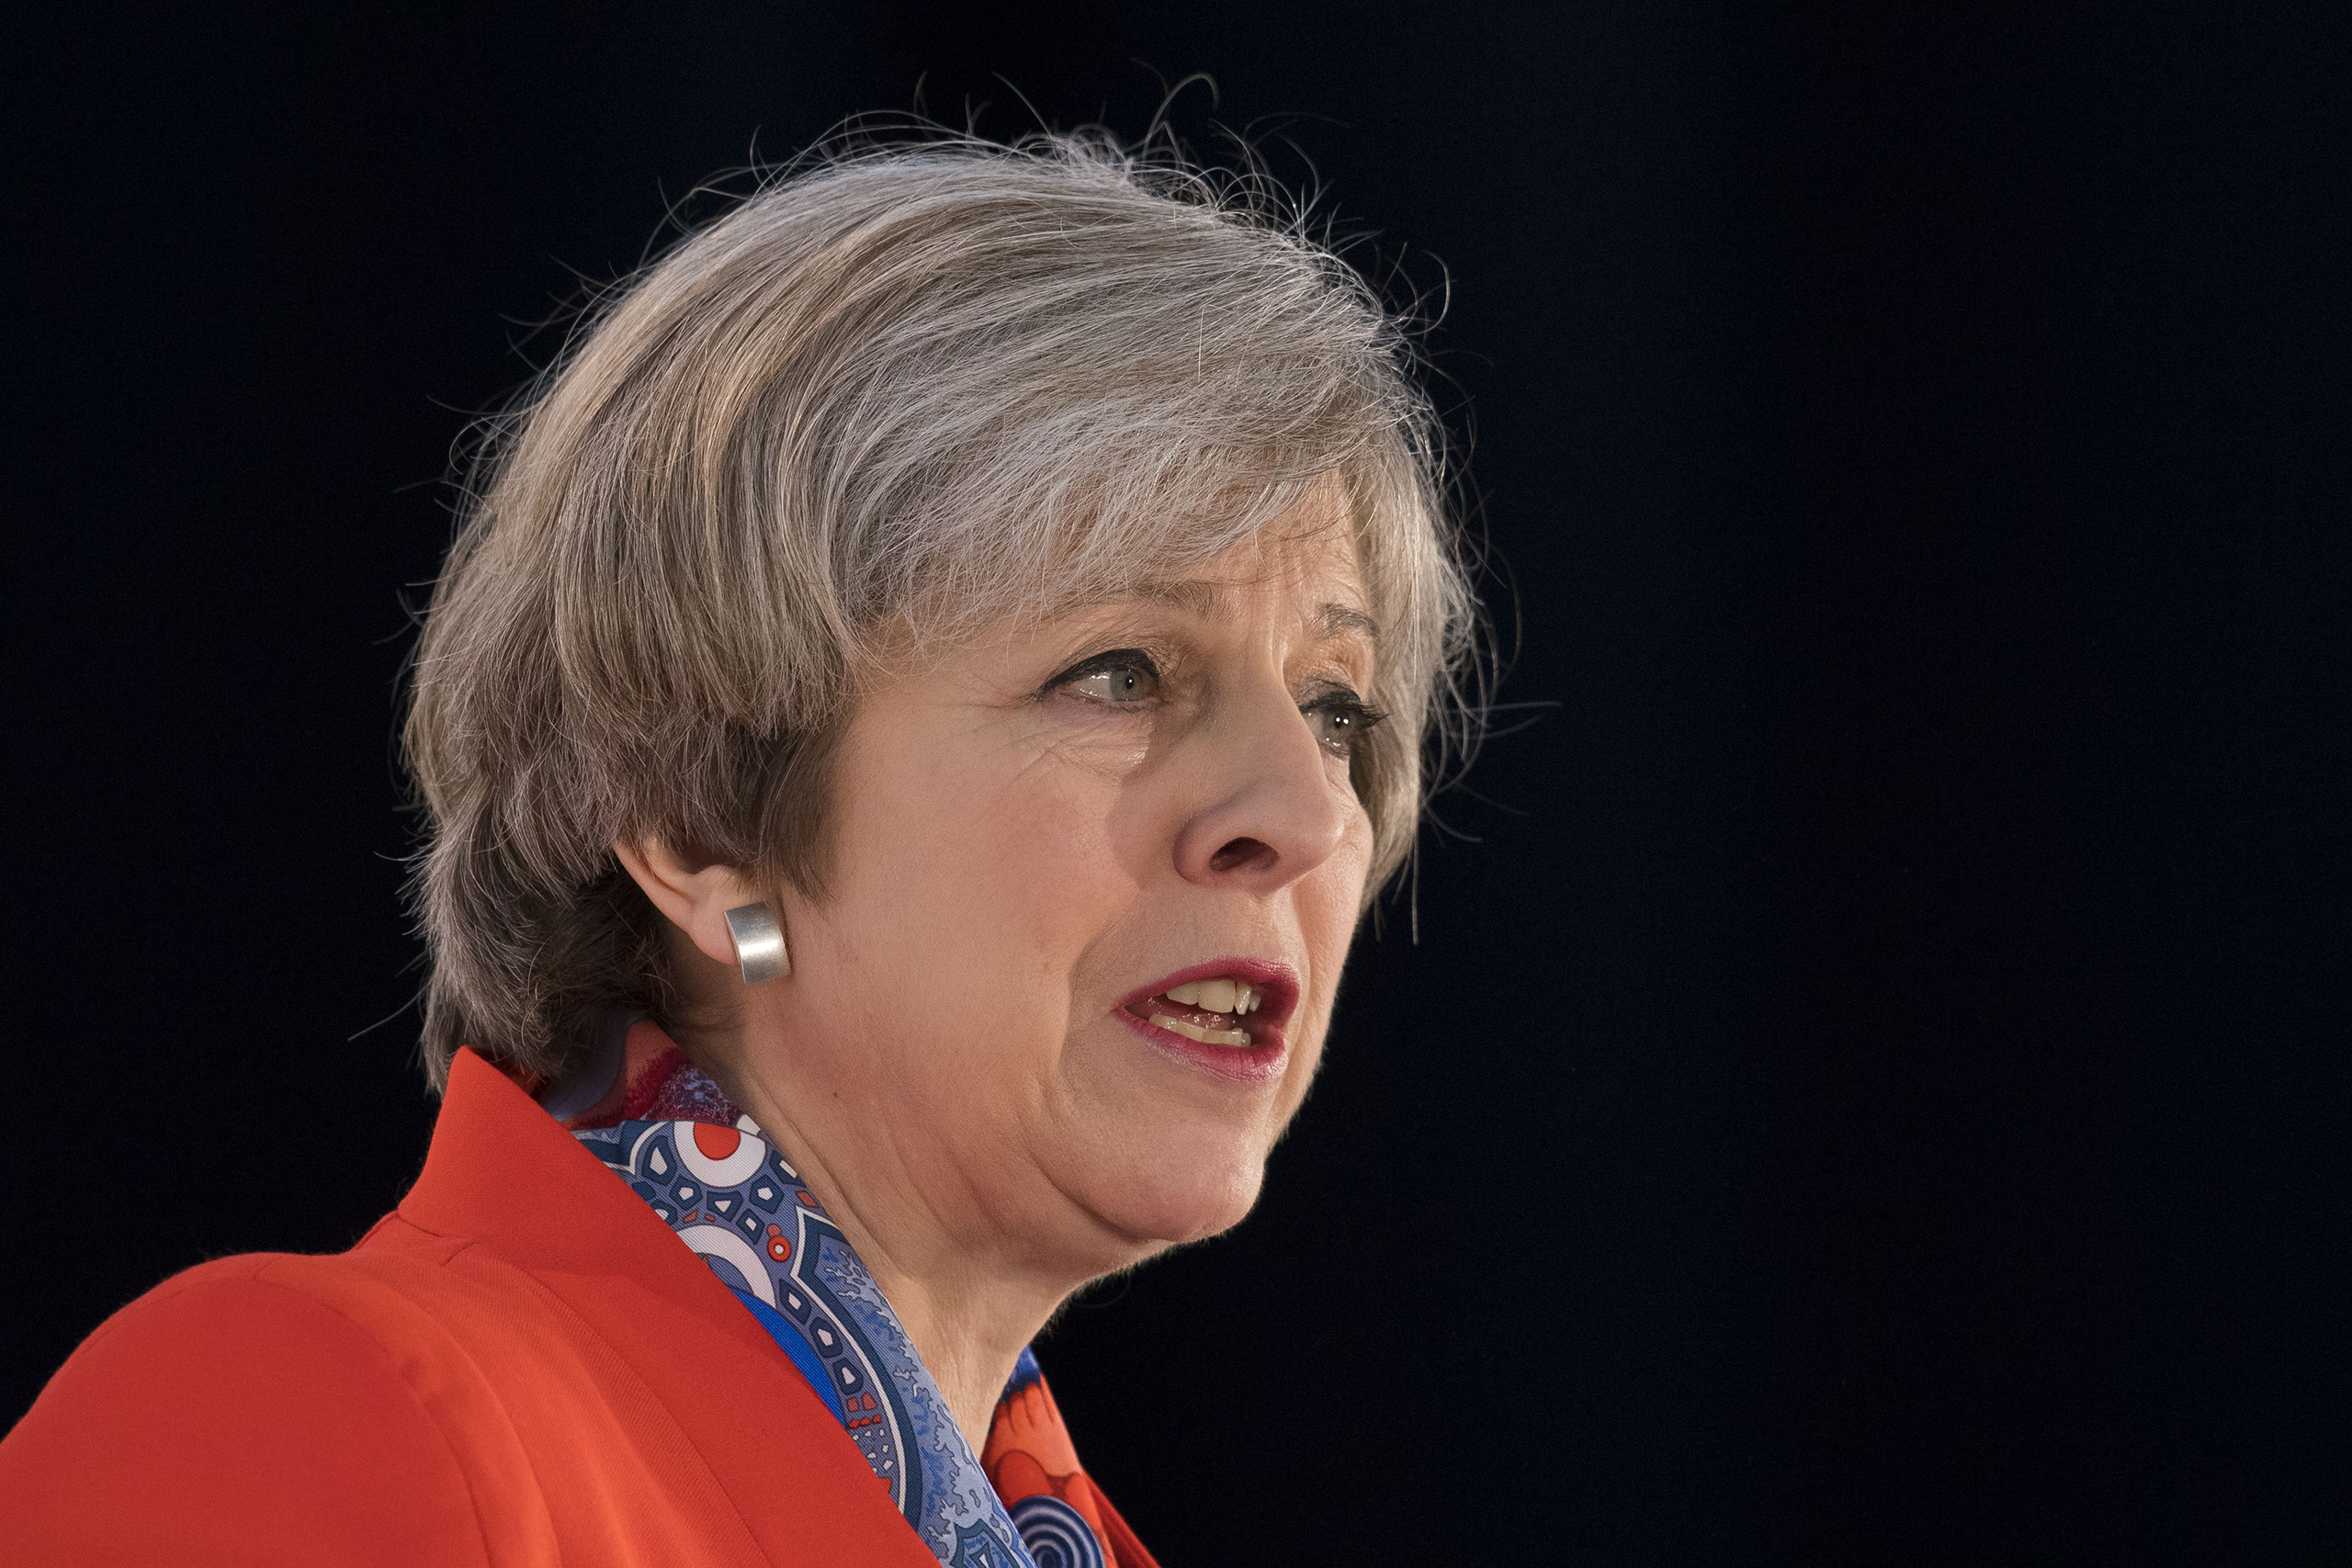 Spain’s Alfonso Dastis has urged Theresa May’s government to keep a cool head during Britain’s E.U. exit talks (Matthew Horwood—Getty Images)